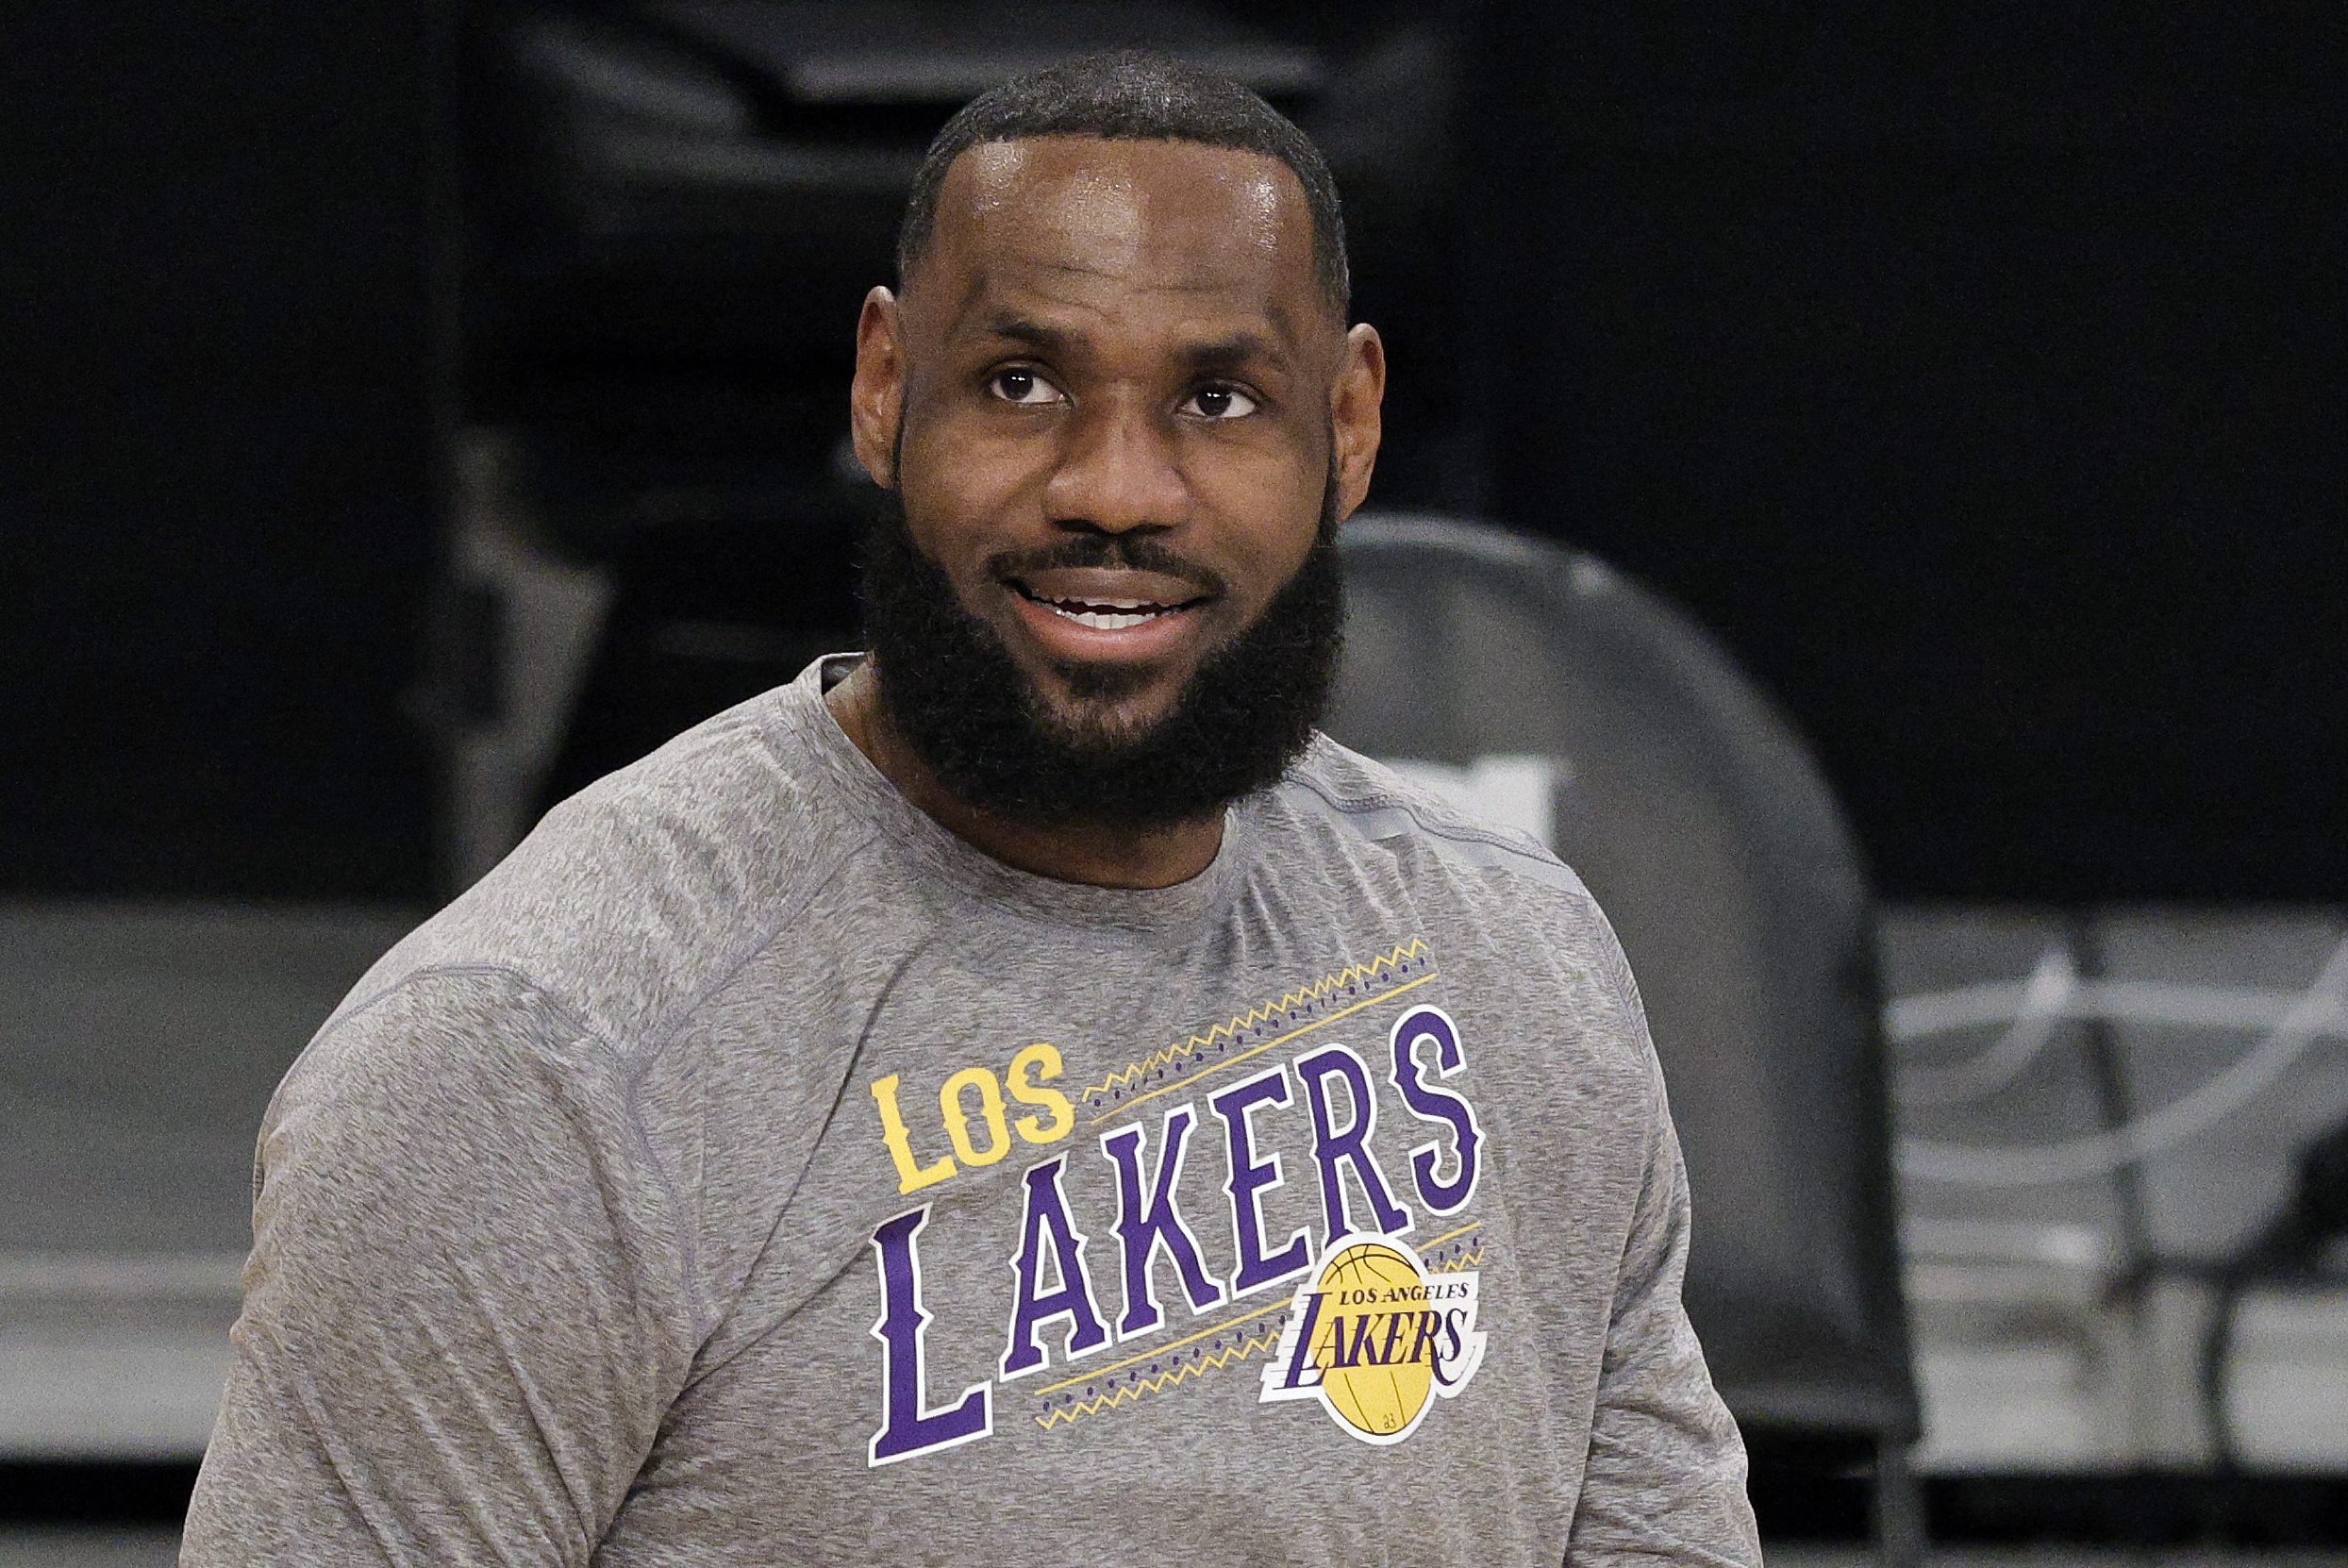 LeBron James of the Los Angeles Lakers on the court in a grey shirt